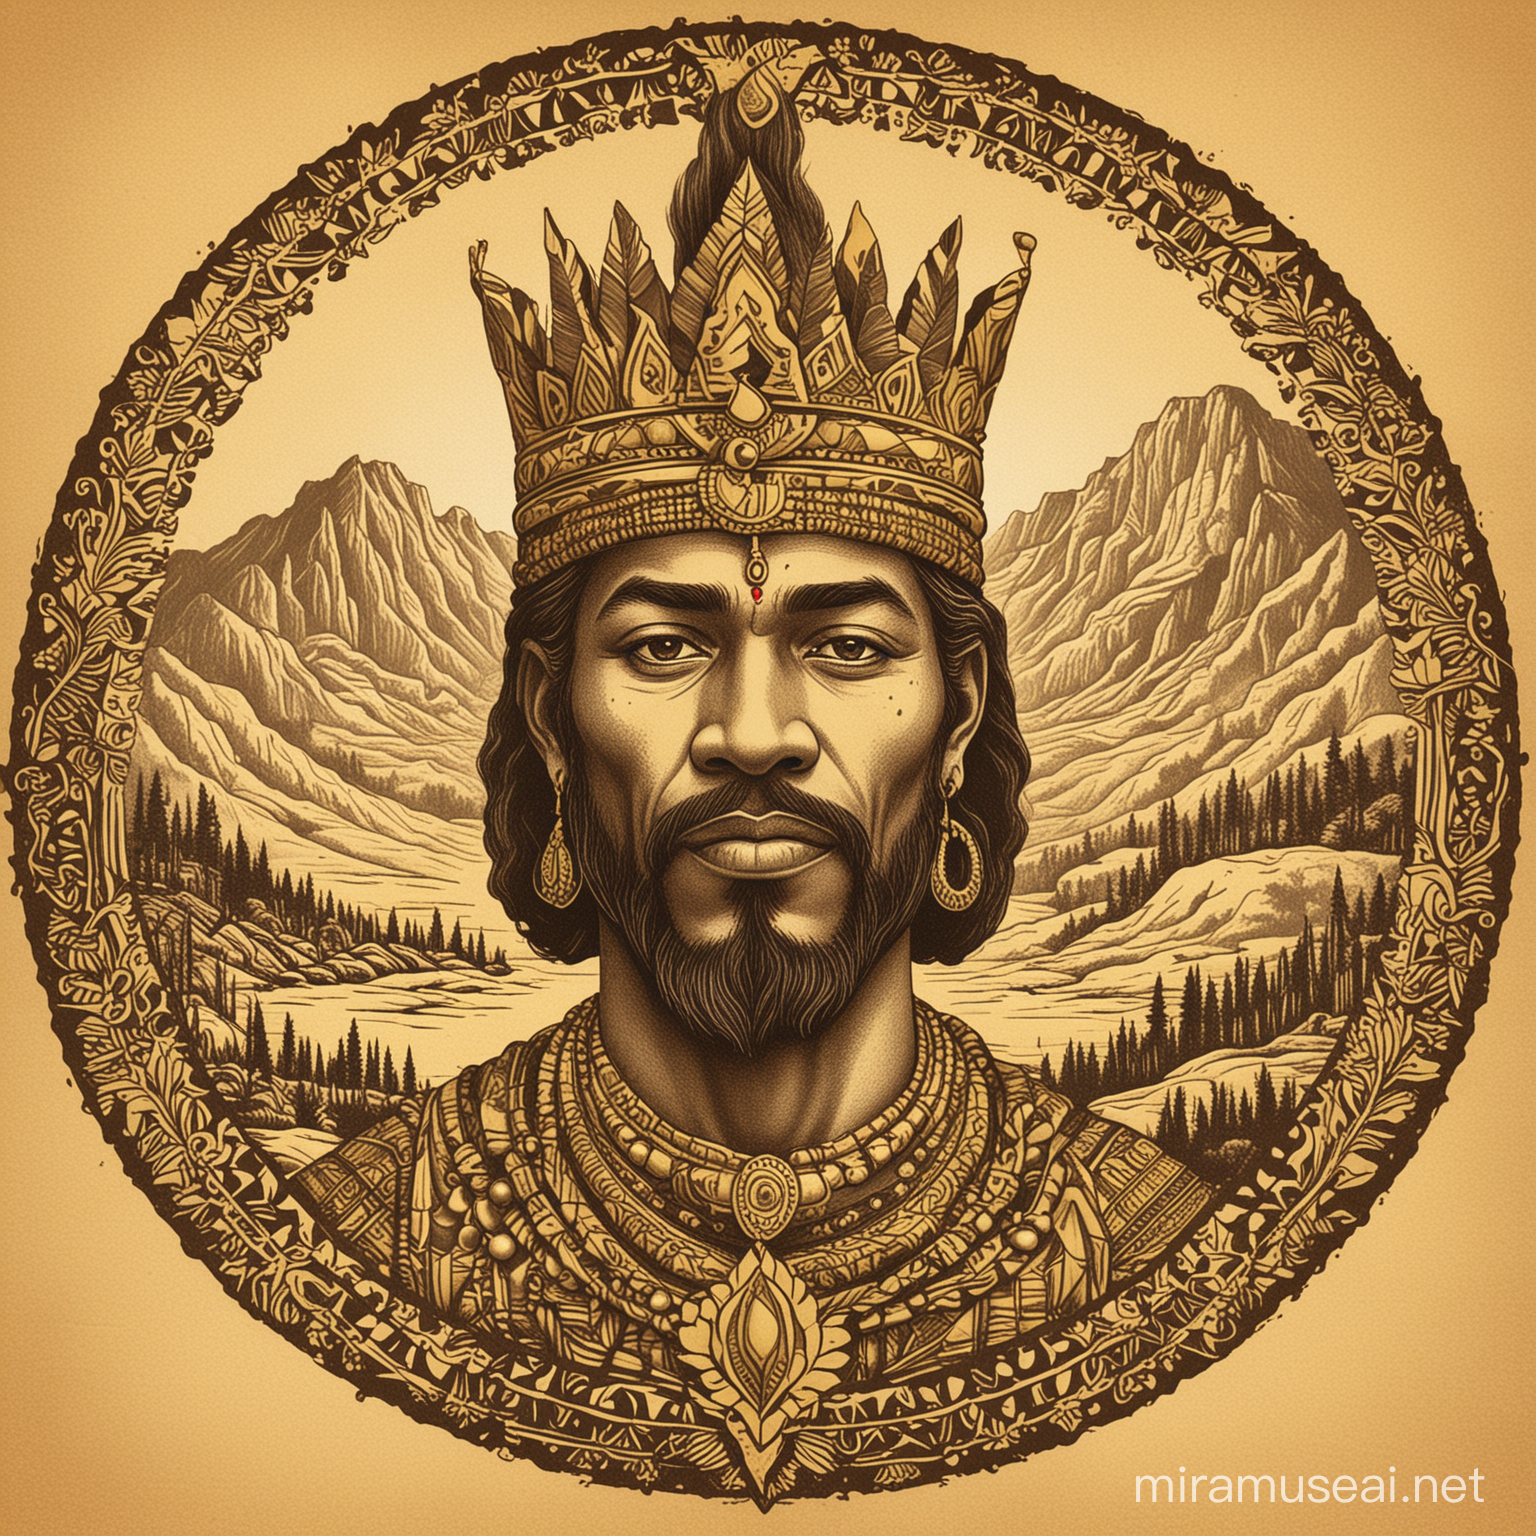 create a circular logo, pencil drawing style, indian inspired, west Maui mountains and the image of an african king at the centre  the in background,  simplified, cultural inspired, 2 colors being teel and sulfur yellow, vector, block print. make the view to have a tint  ultra yellow gold
